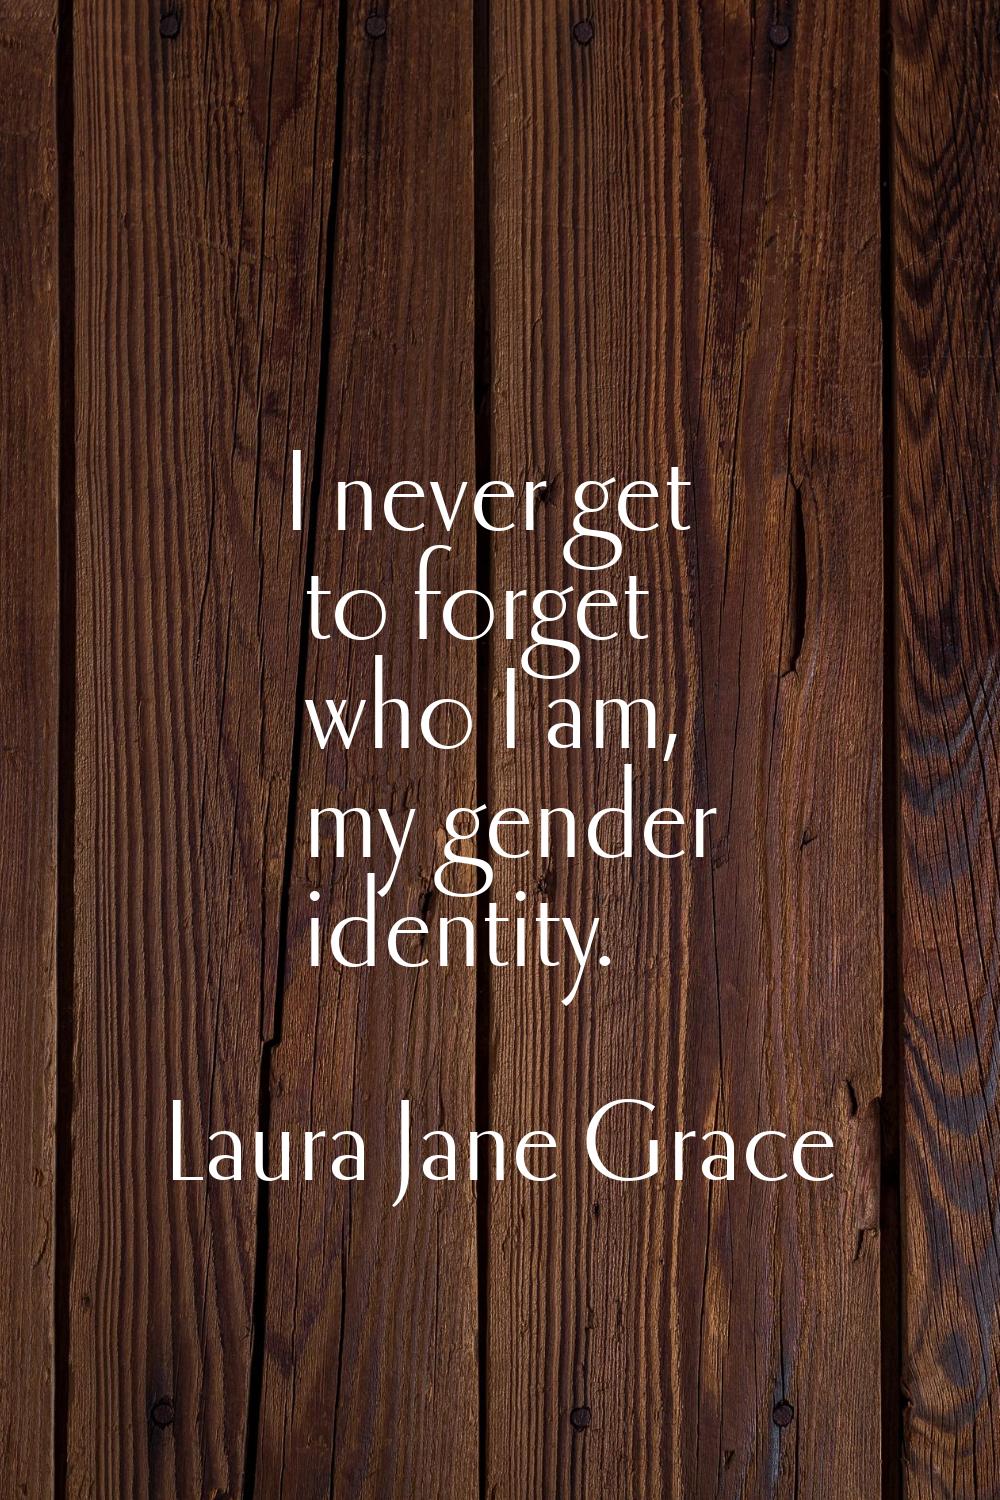 I never get to forget who I am, my gender identity.